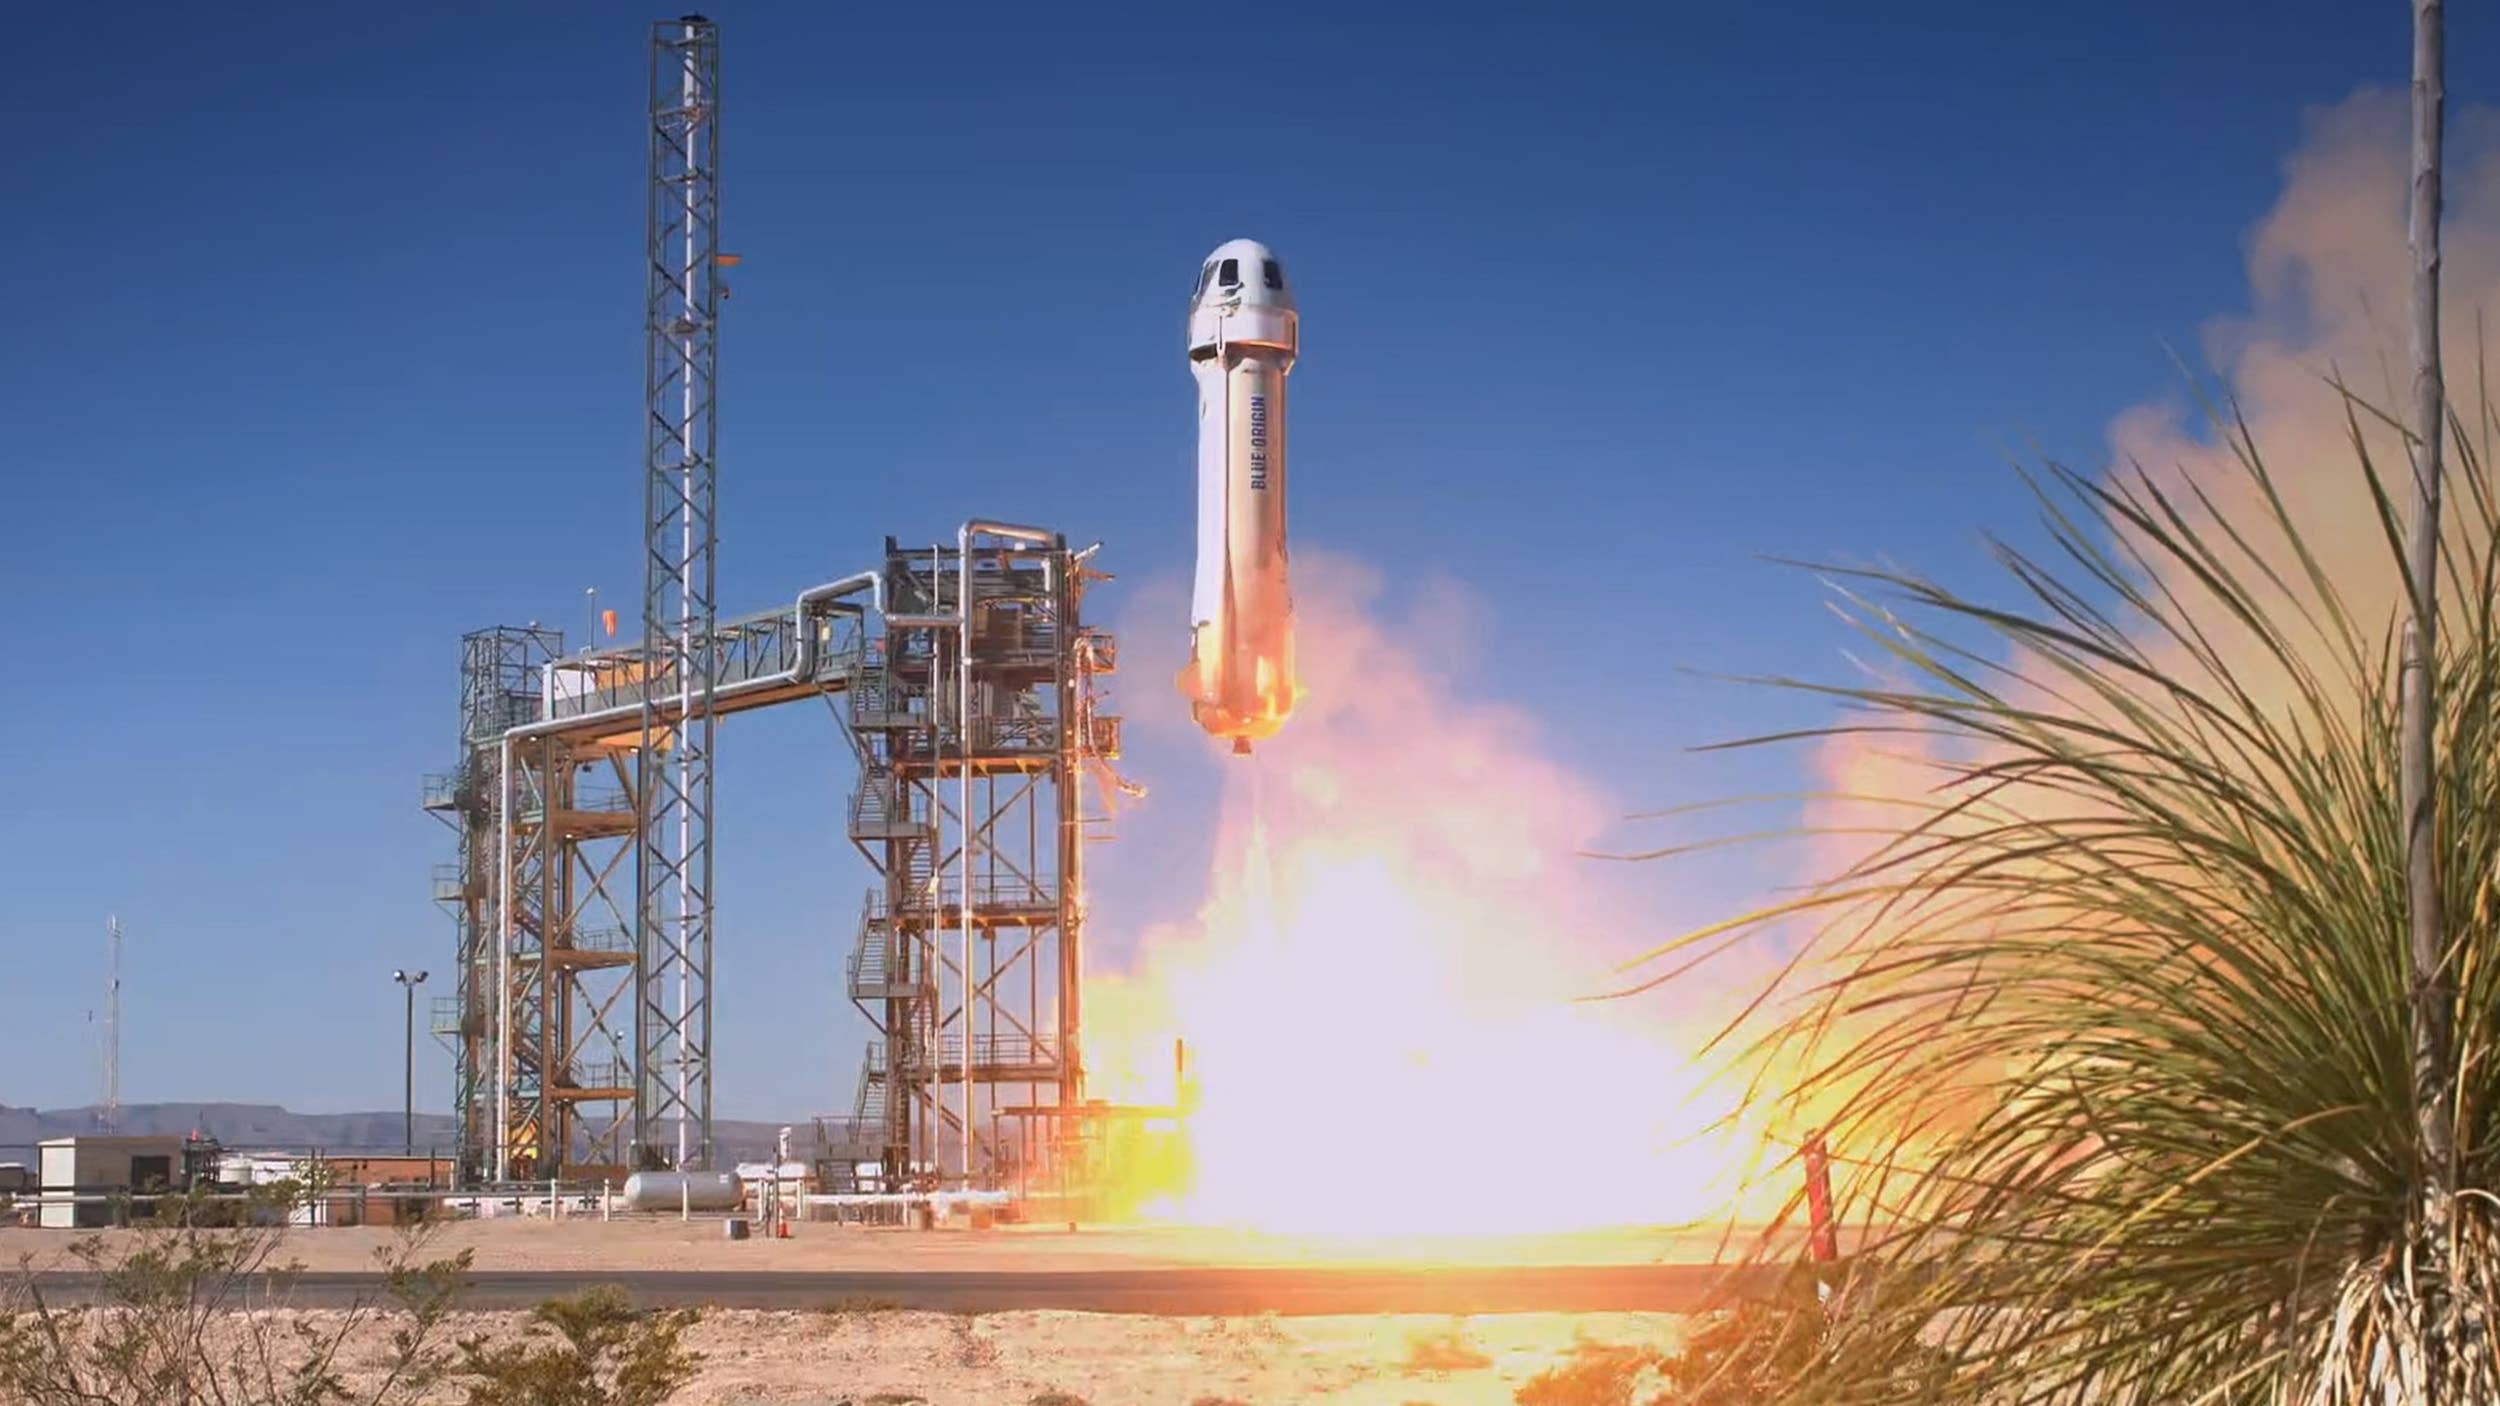 Blue Origin’s New Shepard rocket lifts off during the NS-25 astronaut mission on May 19. Credit: Blue Origin.